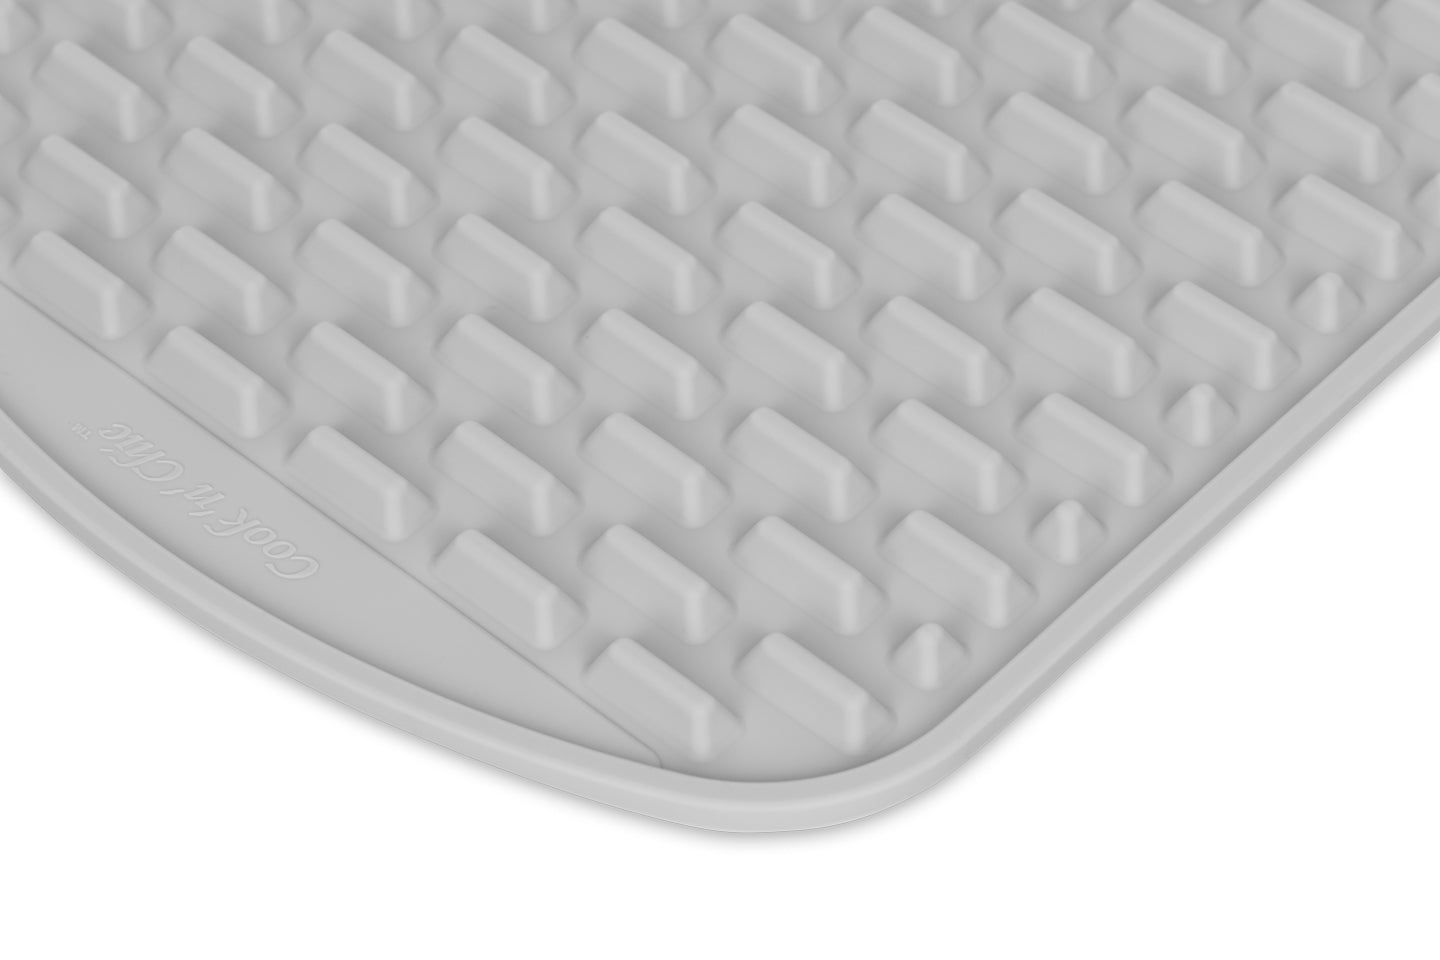 Buy 2-in-1 Silicone Mat at Cook'n'Chic®